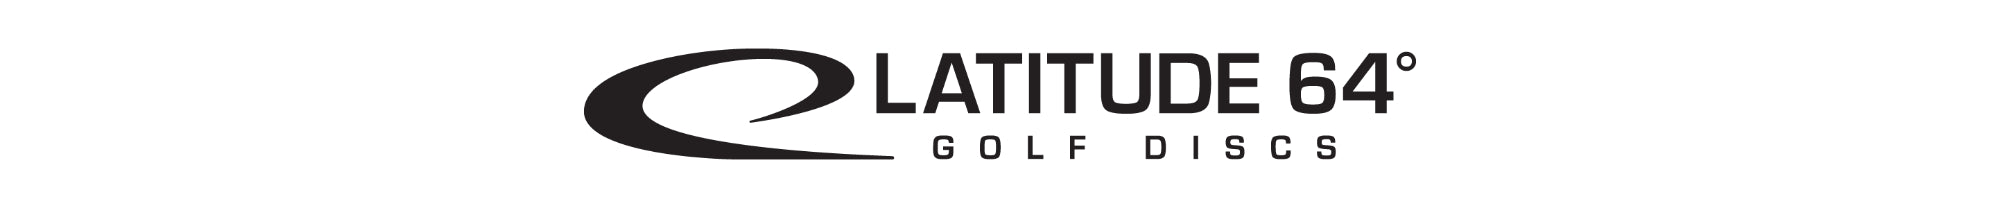 Latitude 64 Putter - Select to View Color Options